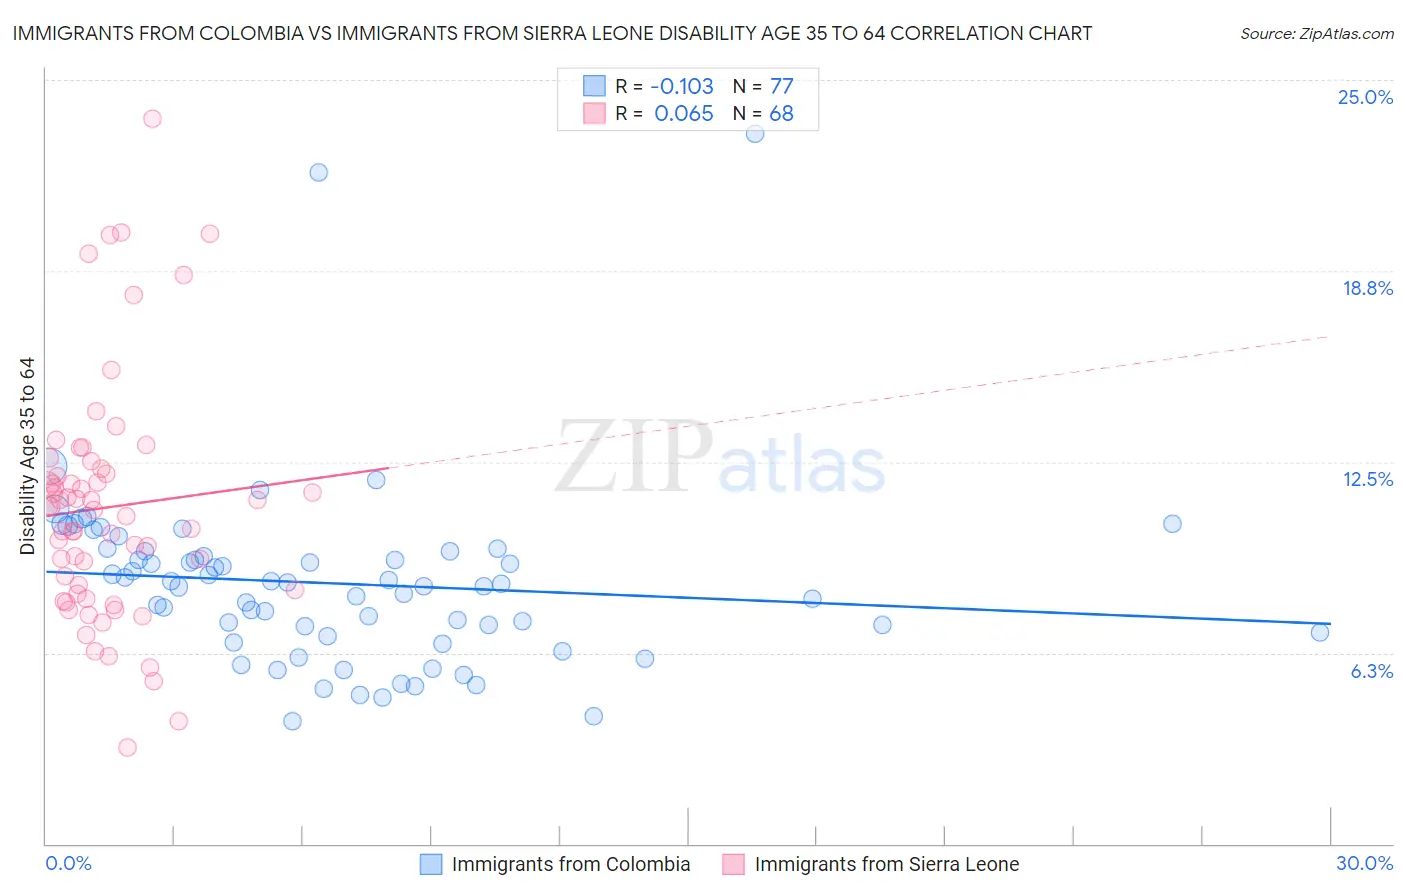 Immigrants from Colombia vs Immigrants from Sierra Leone Disability Age 35 to 64